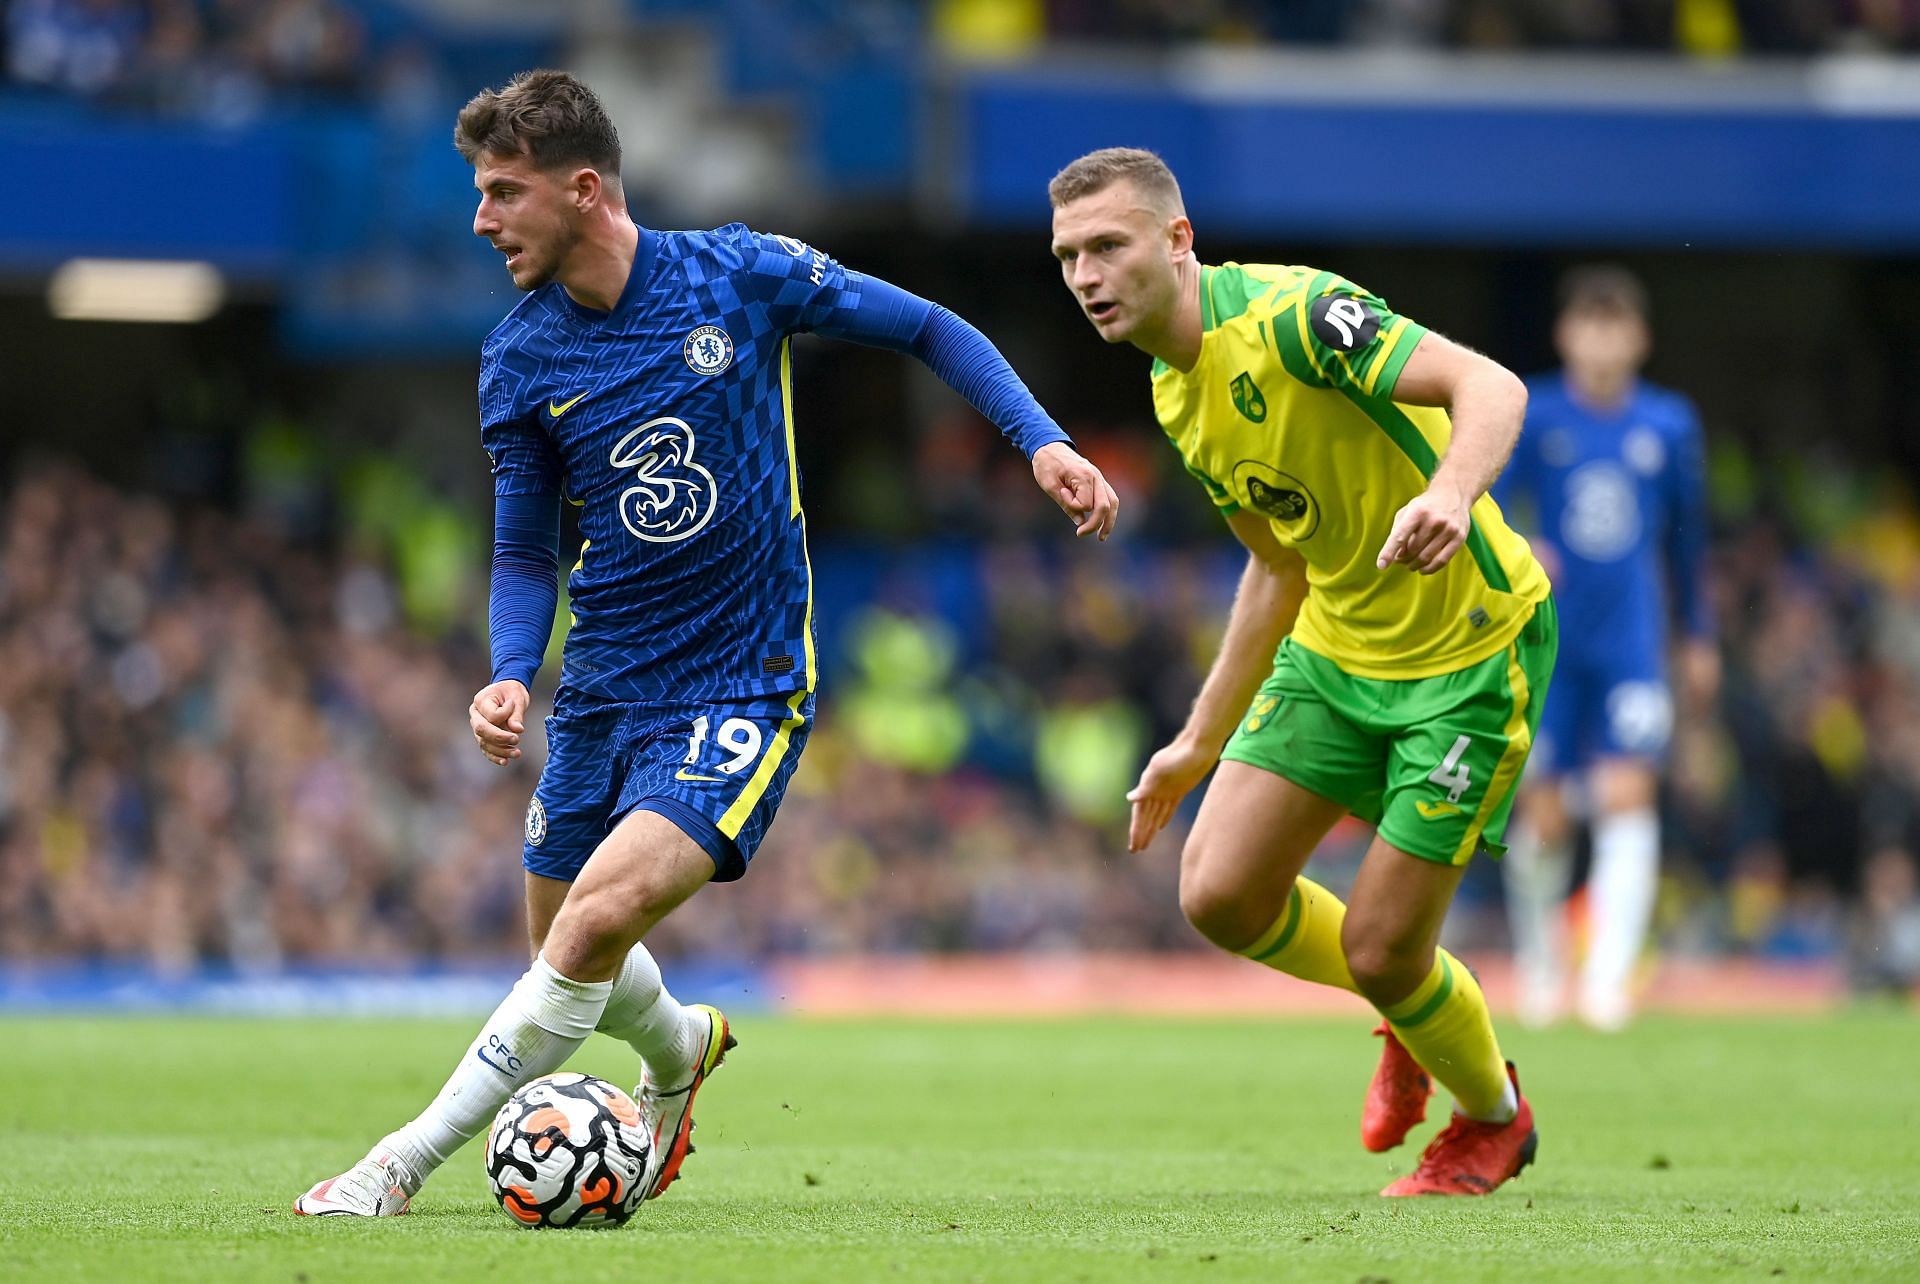 Chelsea travel to Norwich City in their upcoming Premier League fixture